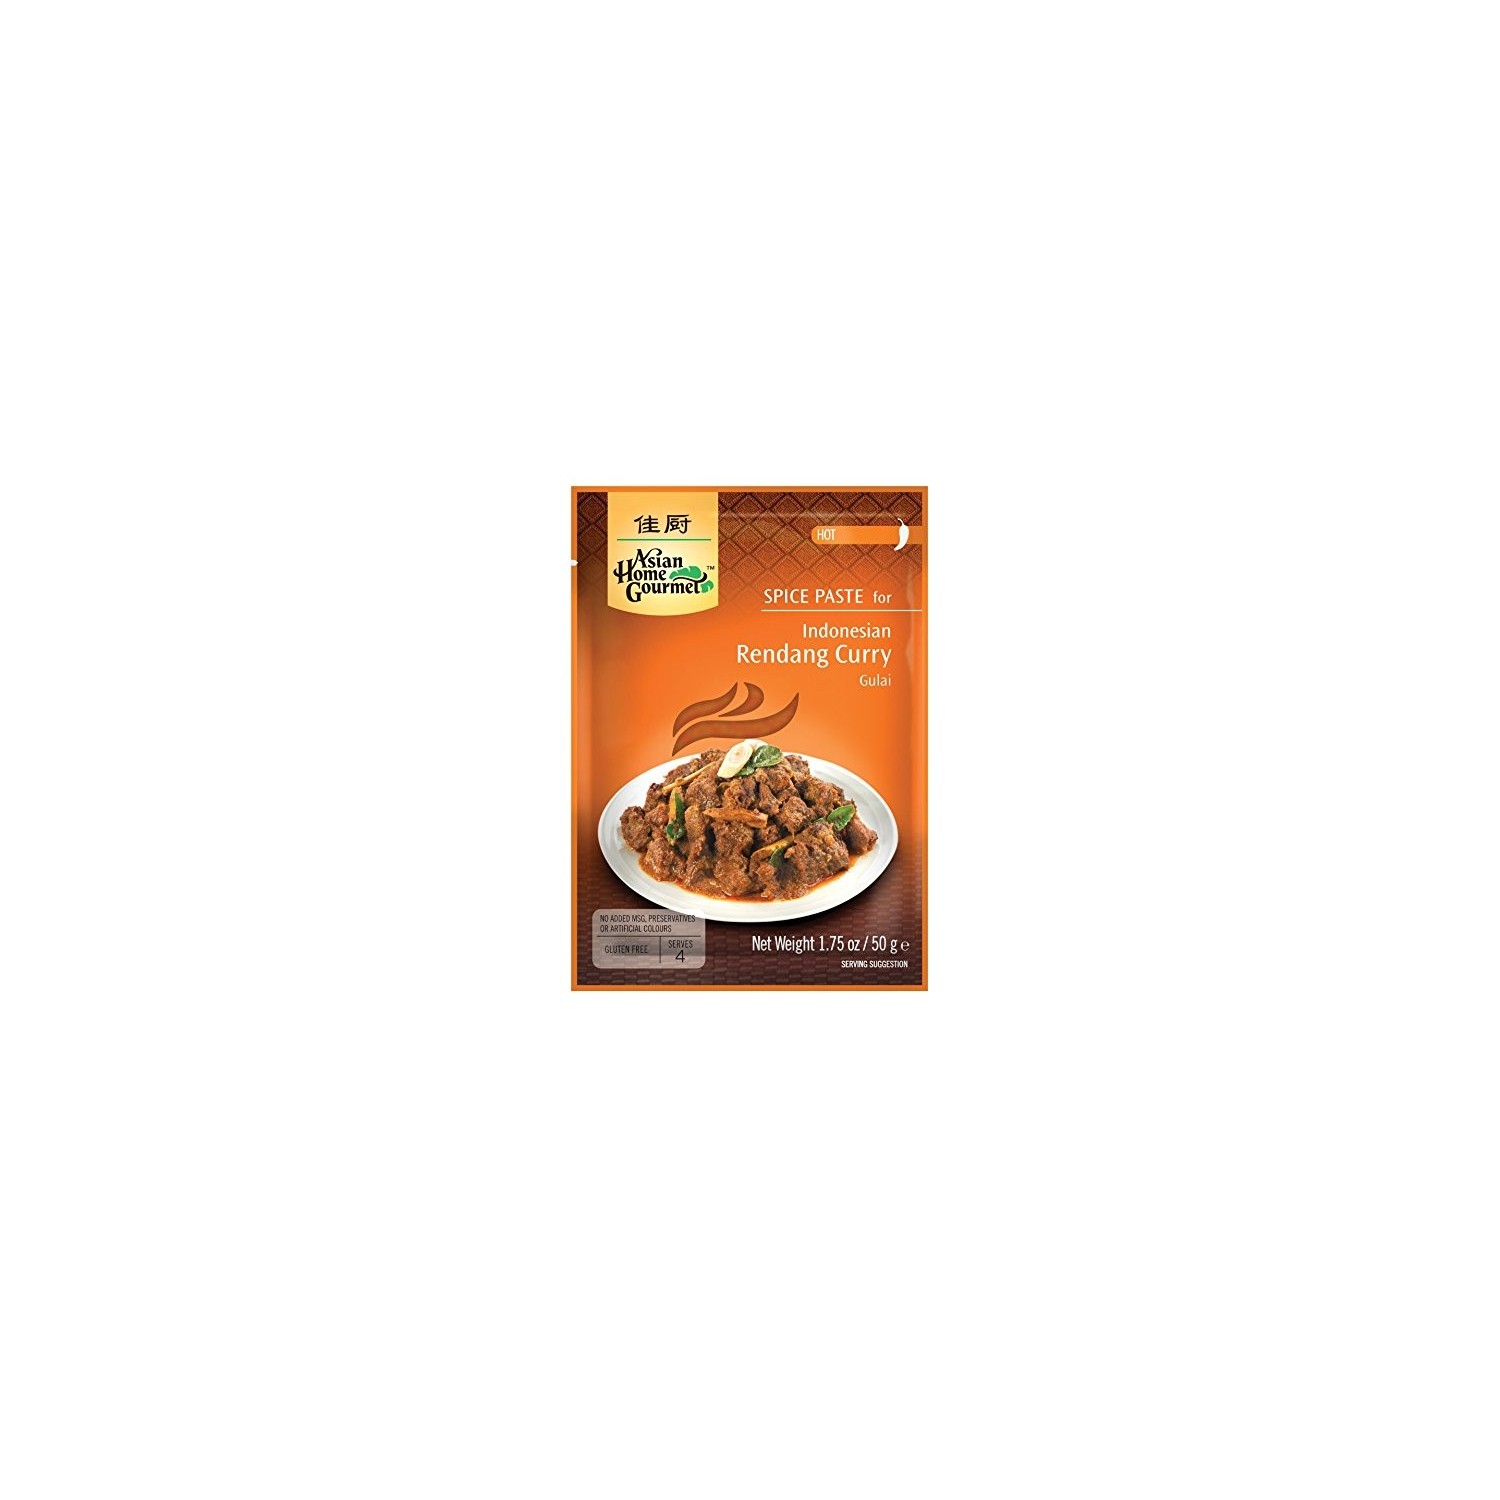 Asian home gourmet, spice paste for indonesian rendang curry, hot - 0015205610206